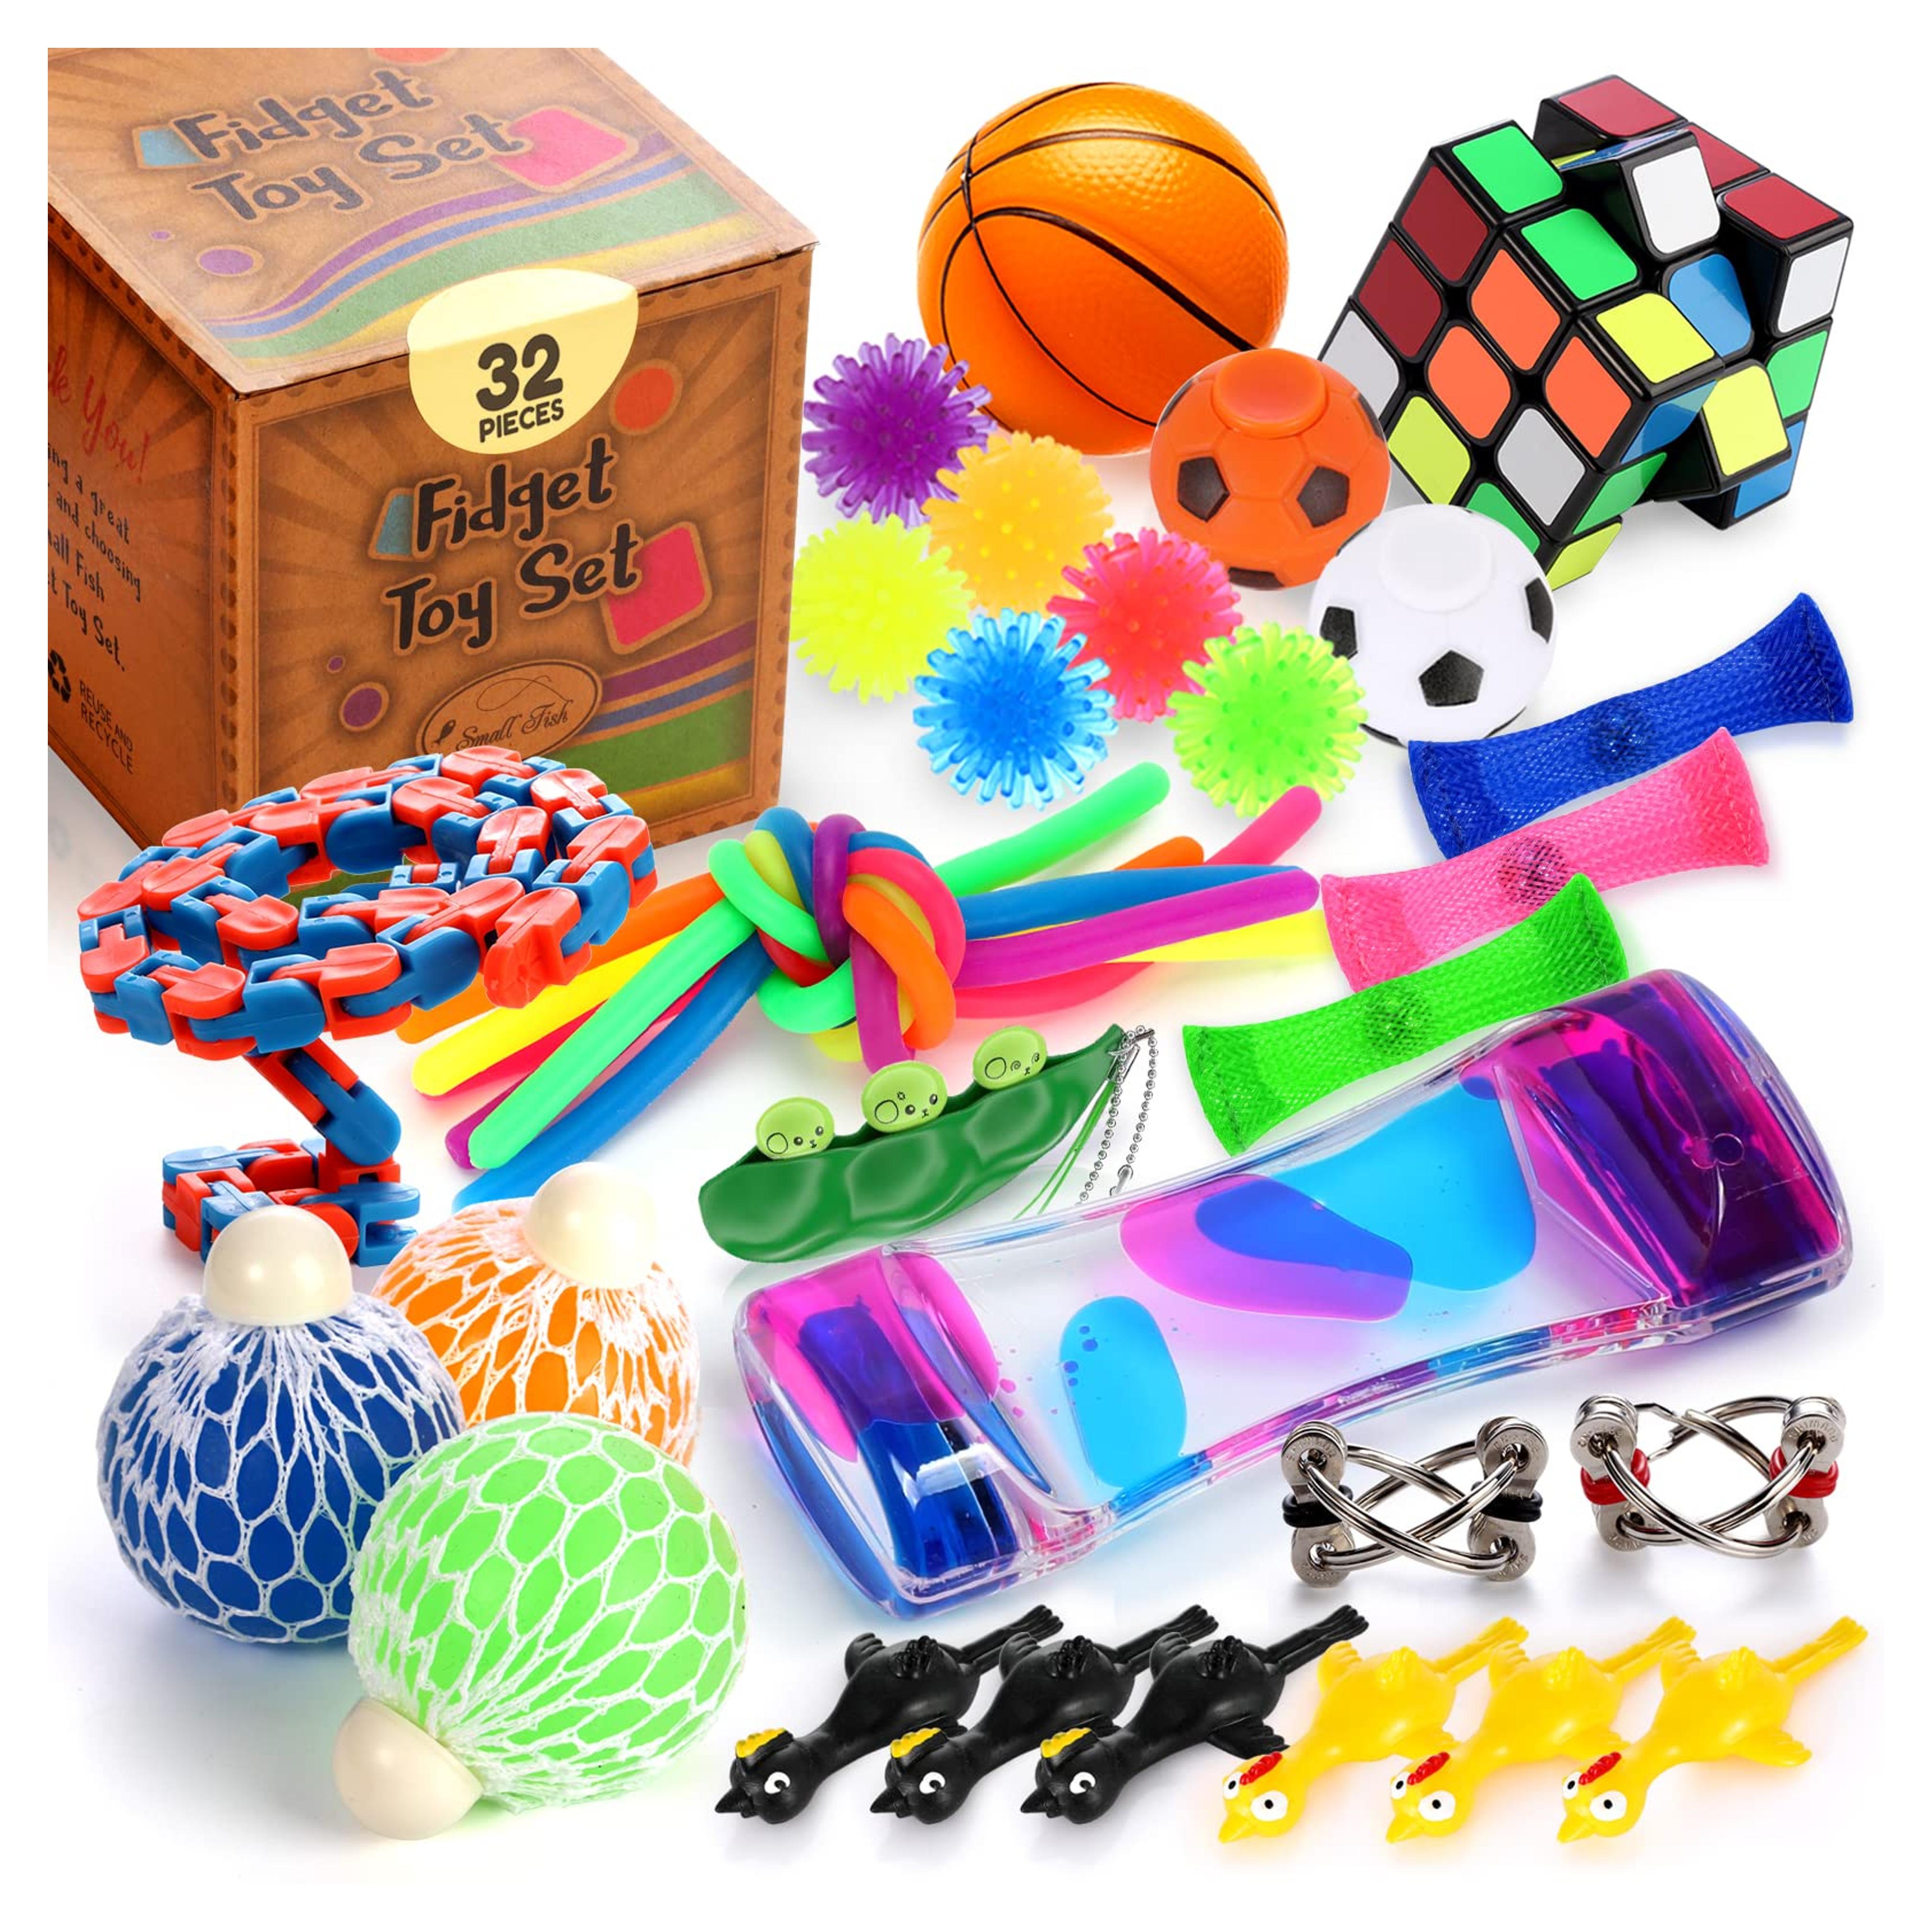 Fidget Toy Pack 40 Pcs, Sensory Toys Bundle for Stress Relief, Anti-Anxiety, Relaxing, and Calming for Kids and Adults, Hand Therapy Pack for Boys and Girls with Autism, ADD, and ADHD by SMALL FISH